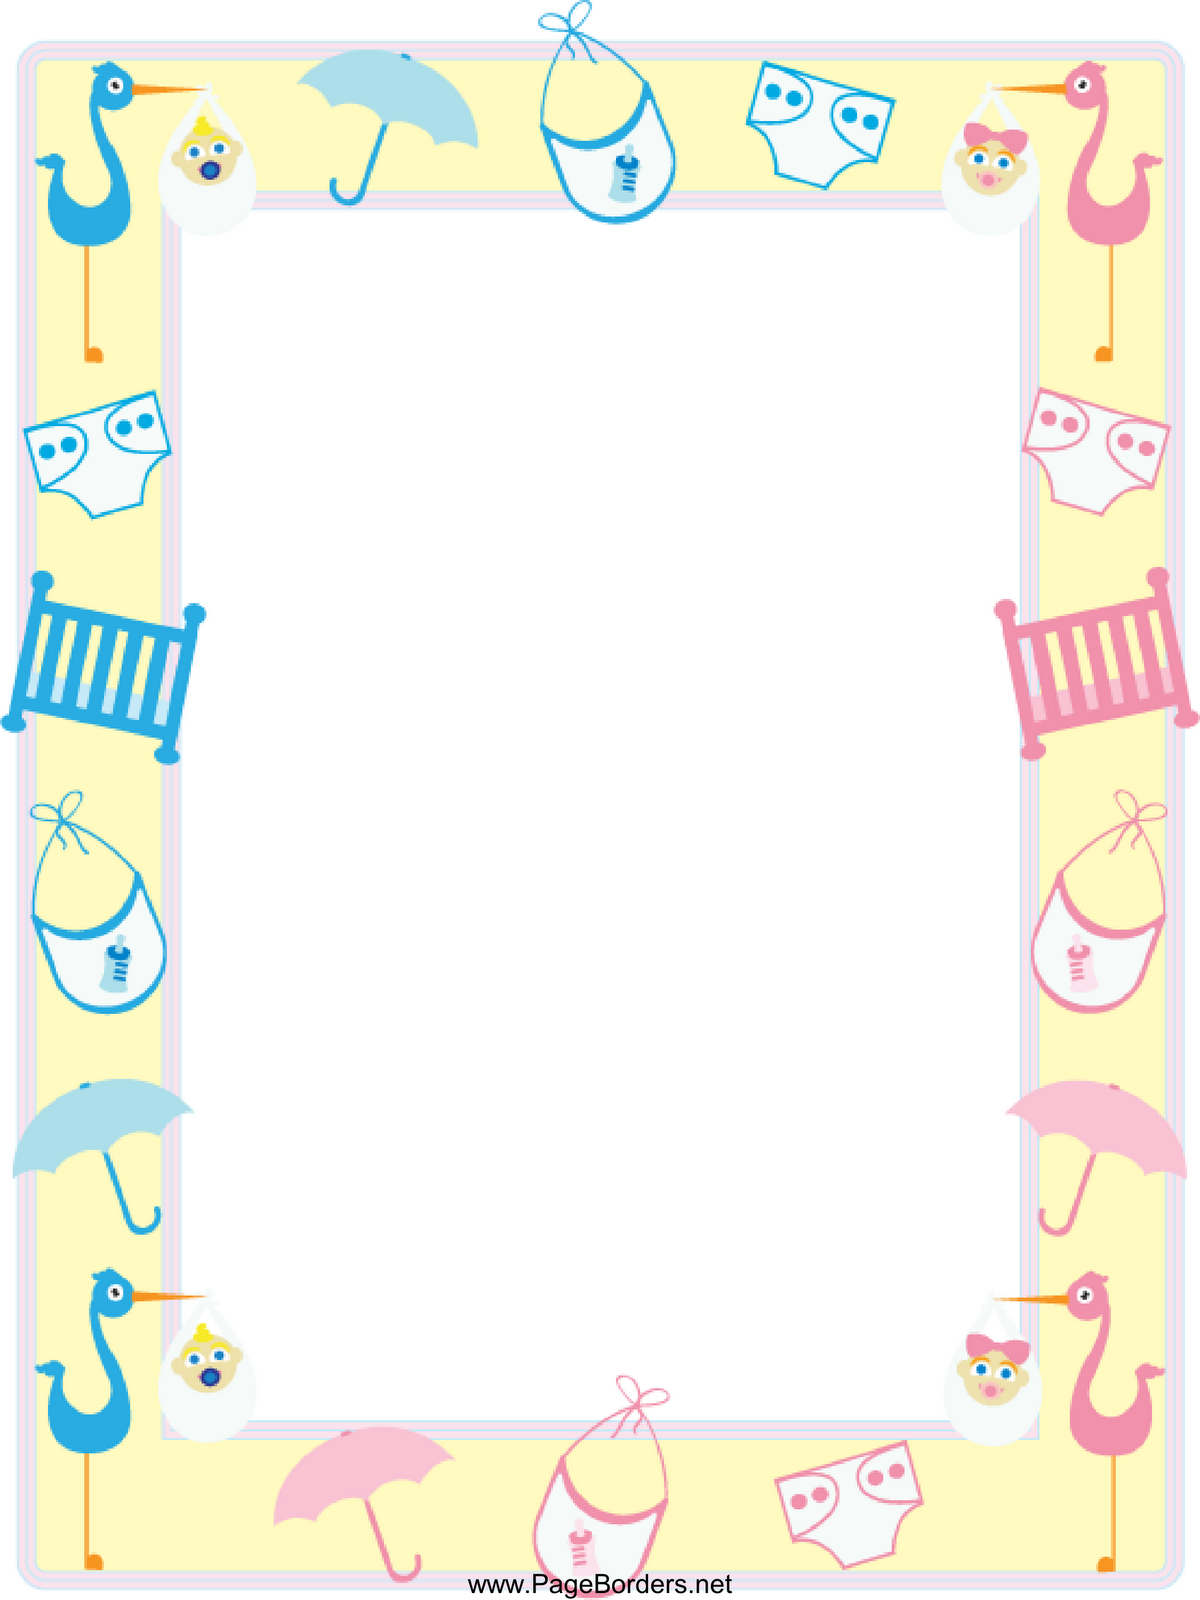 Free Baby Borders Add Some Charm And Creativity To Your Little One s Artwork - Free Printable Baby Borders For Paper